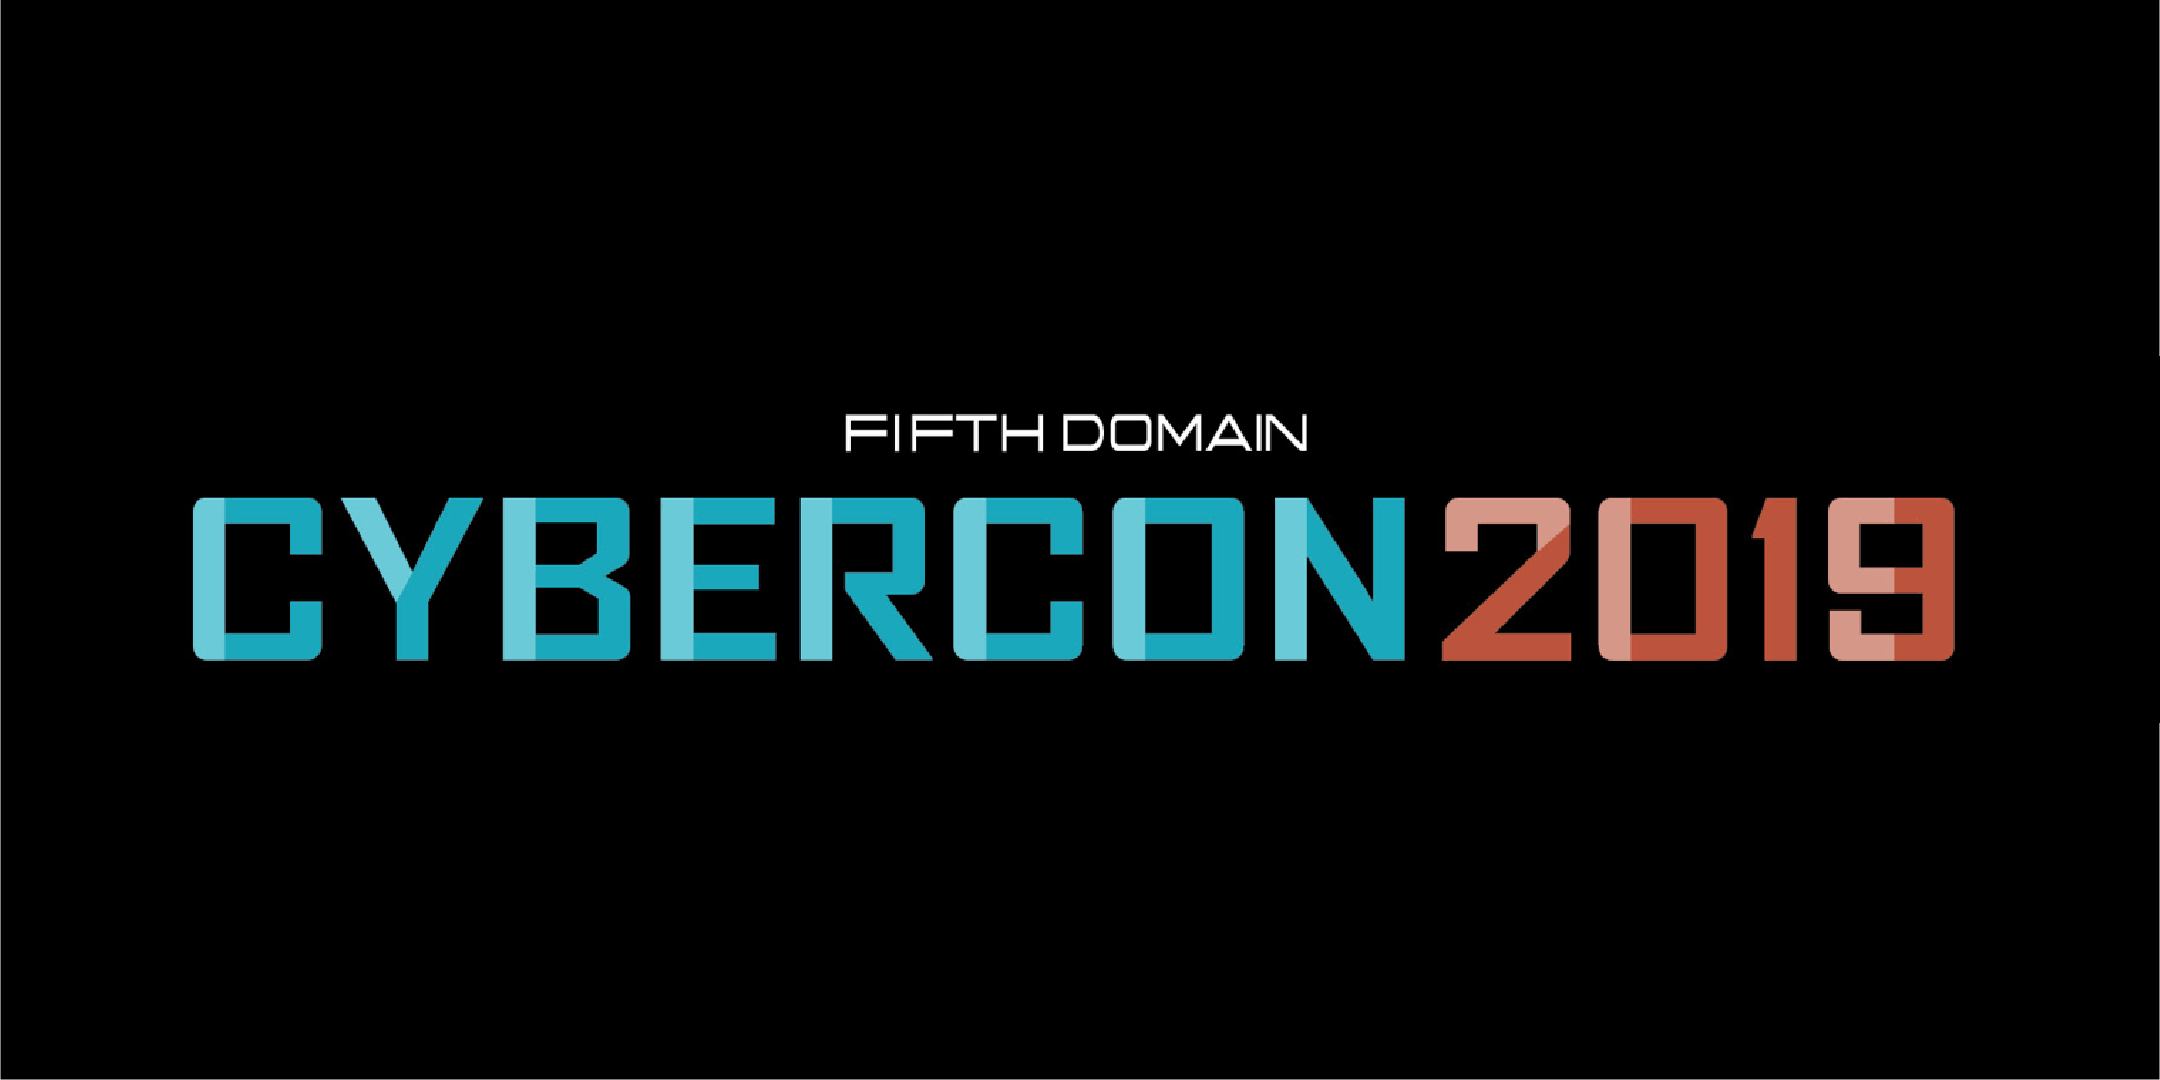 CyberCon 2019: Securing Tomorrow